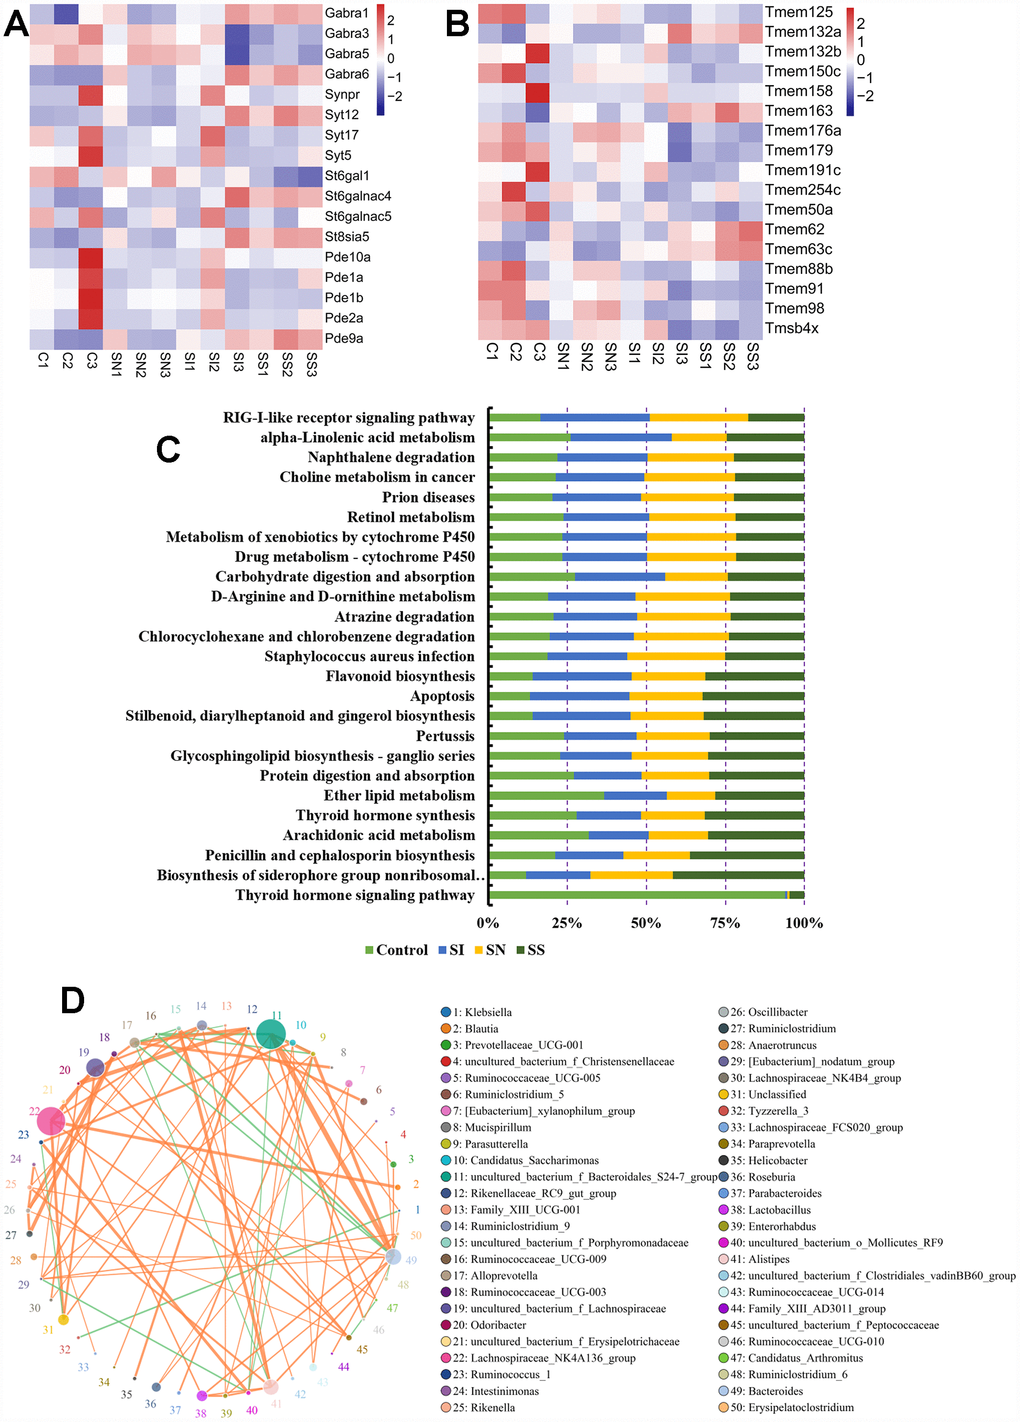 Association analysis of circNF1-419, intestinal transcriptome and gut microbiota. Influences on the expression of GABRA1, GABRA6, St6galnac4, St8sia5, Pde9a (A), Tmem132a, Tmem163, Tmem62 and Tmem63c (B) in brain tissues. Kyoto Encyclopedia of Genes and Genomes (KEGG) enrichment of 16S functional gene prediction analysis using PICRUSt also showing altered signaling pathways (C) and the network (D). Data are presented as the means of more than 8 independent experiments, see also in Supplementary Figure 4.